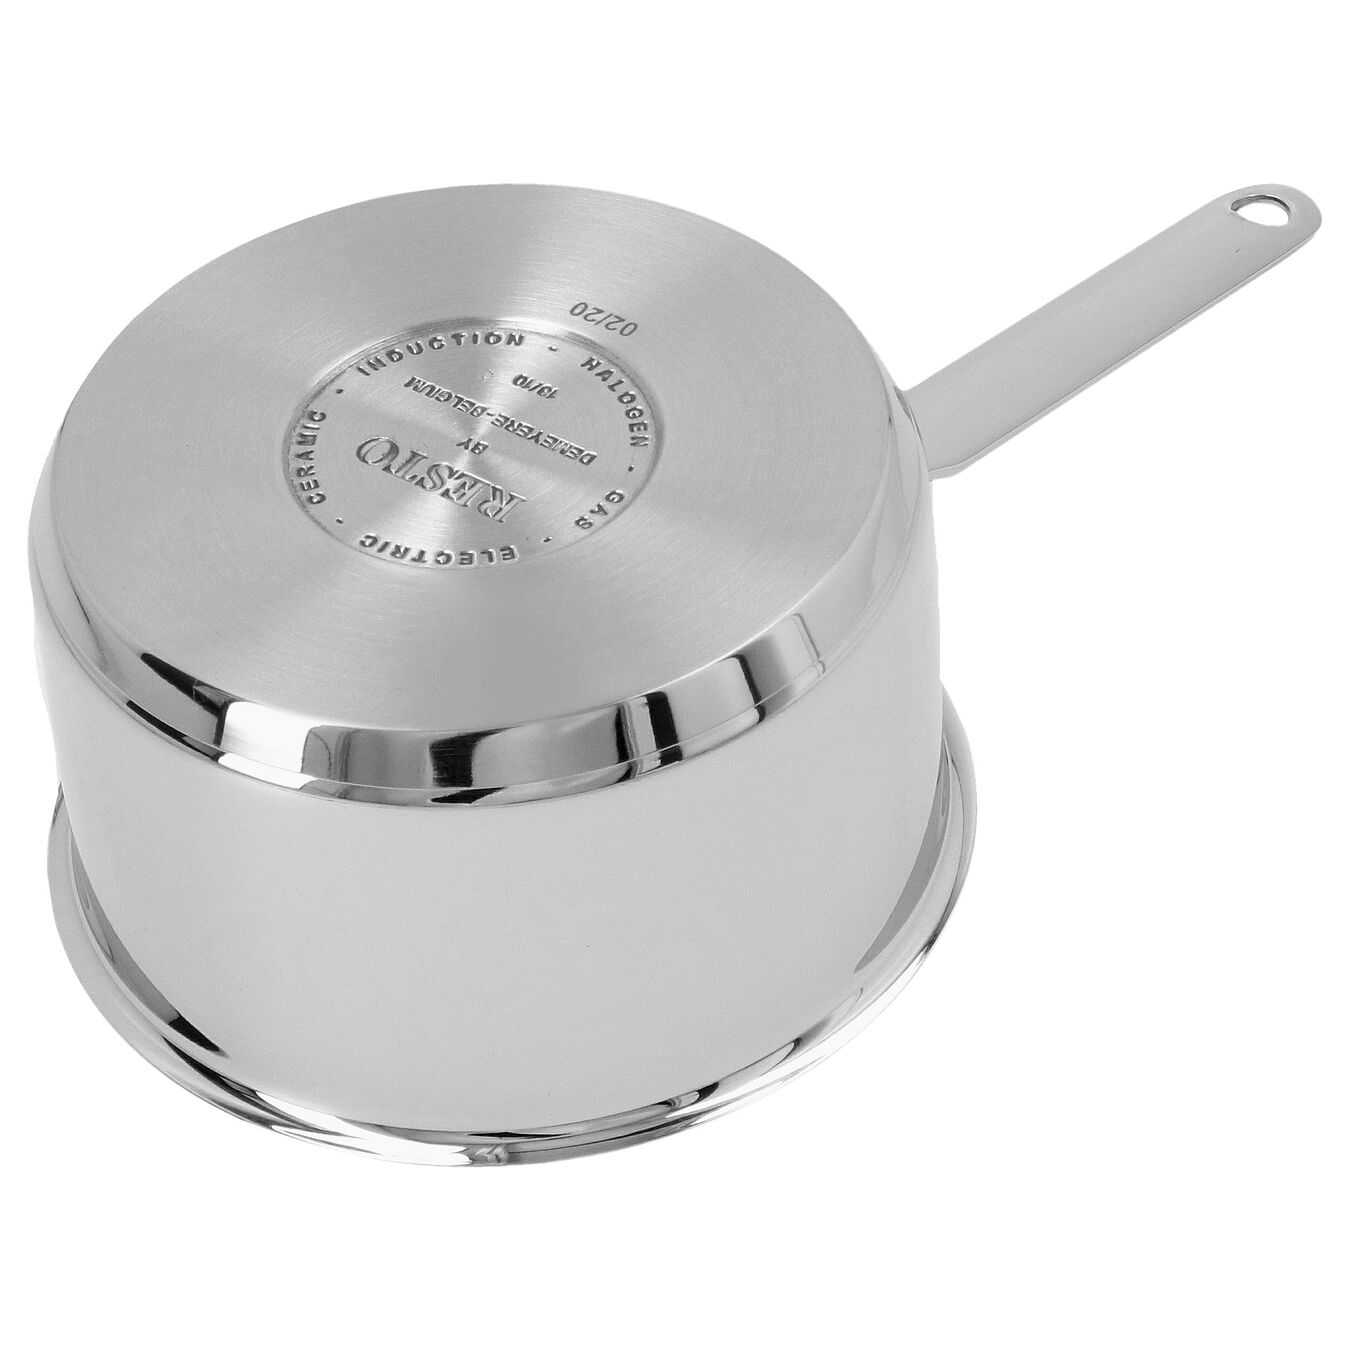 12 cm 18/10 Stainless Steel Saucepan without lid silver,,large 2